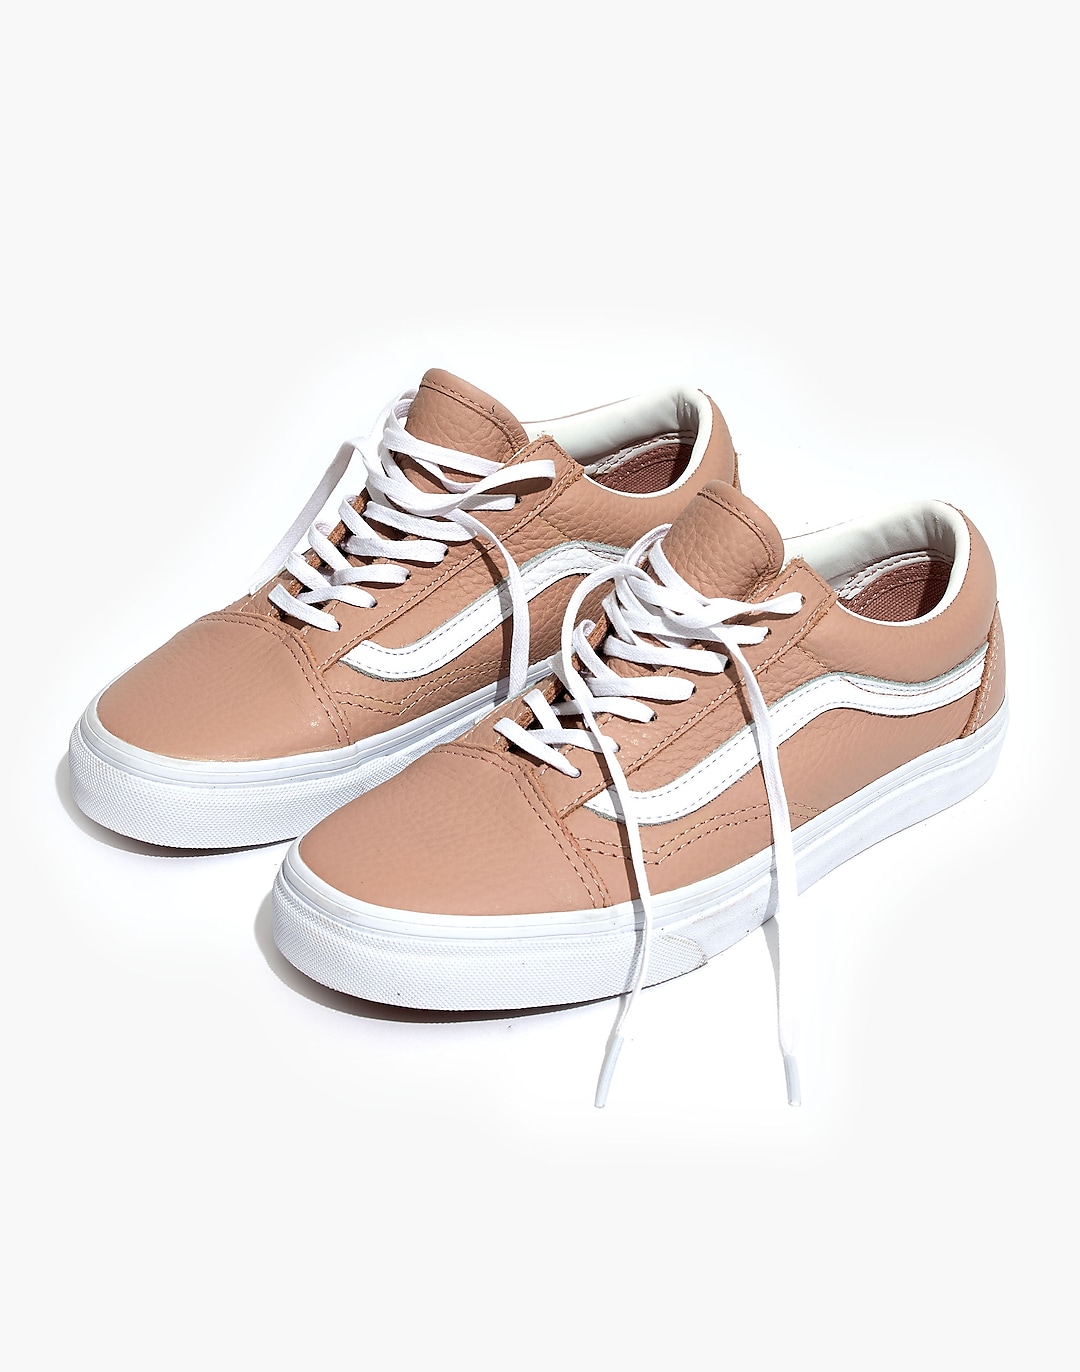 Unisex Old Skool Lace-Up Sneakers in Pink